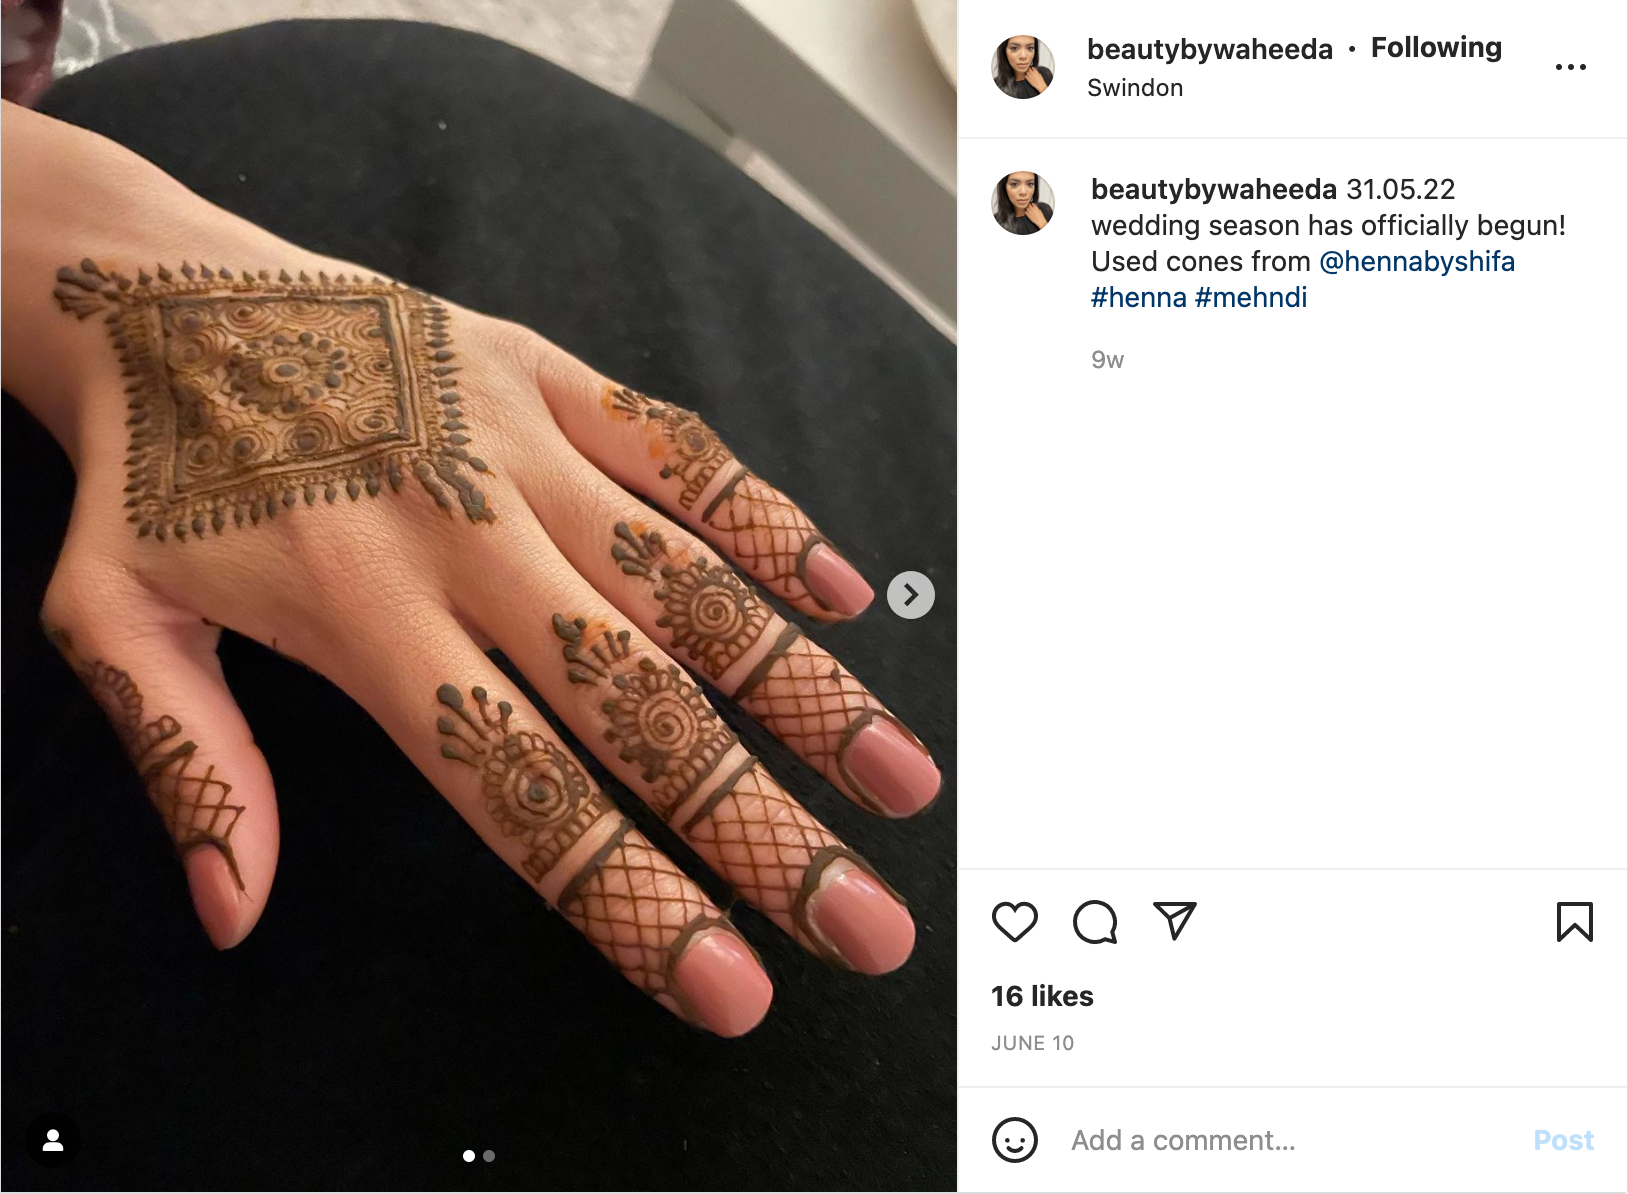 A screenshot of an instagram post showing a hand decorated with henna from Waheeda's beauty page